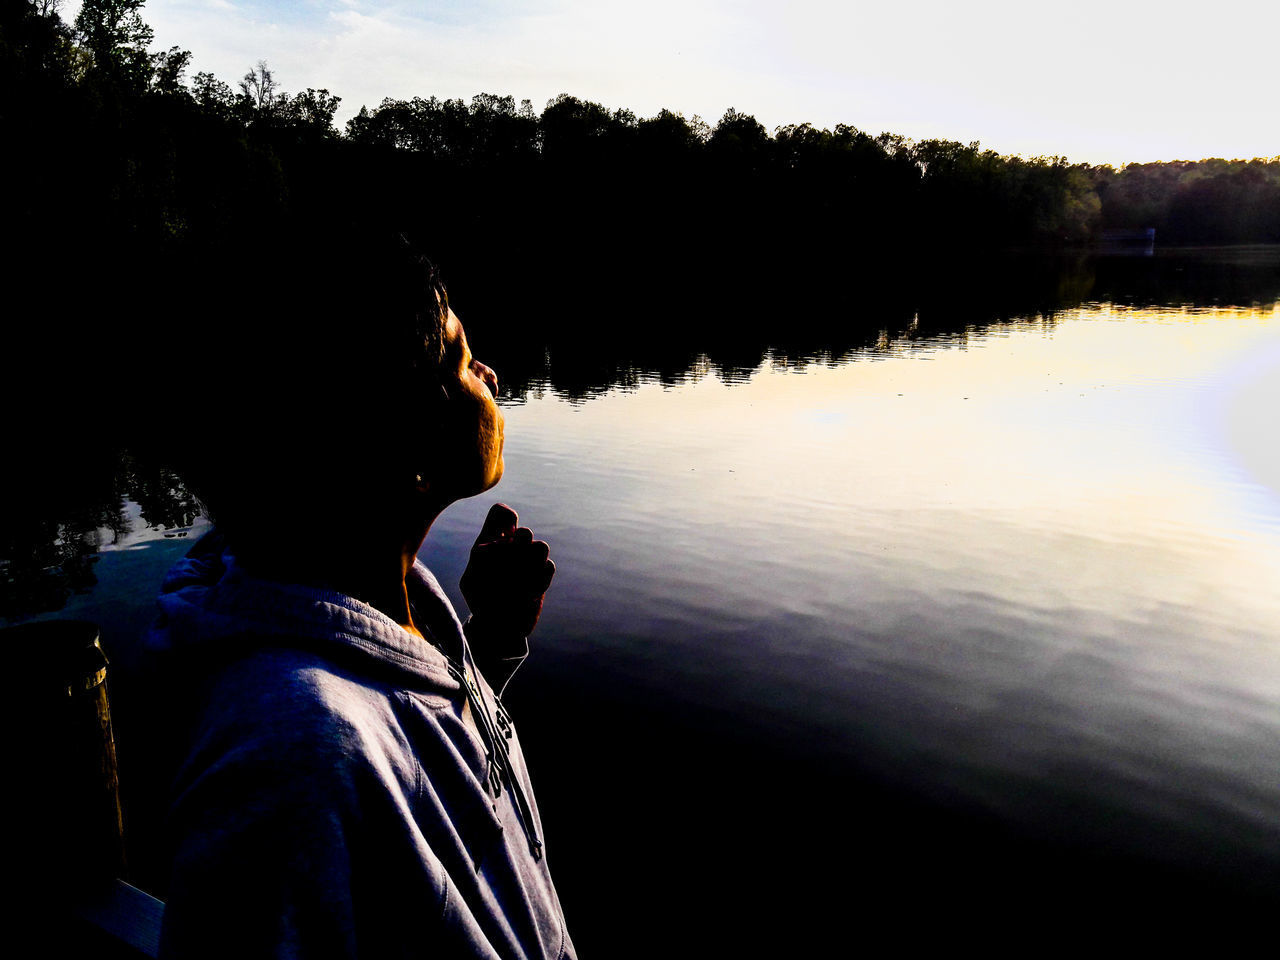 PORTRAIT OF SILHOUETTE MAN ON LAKE AGAINST SKY DURING SUNSET